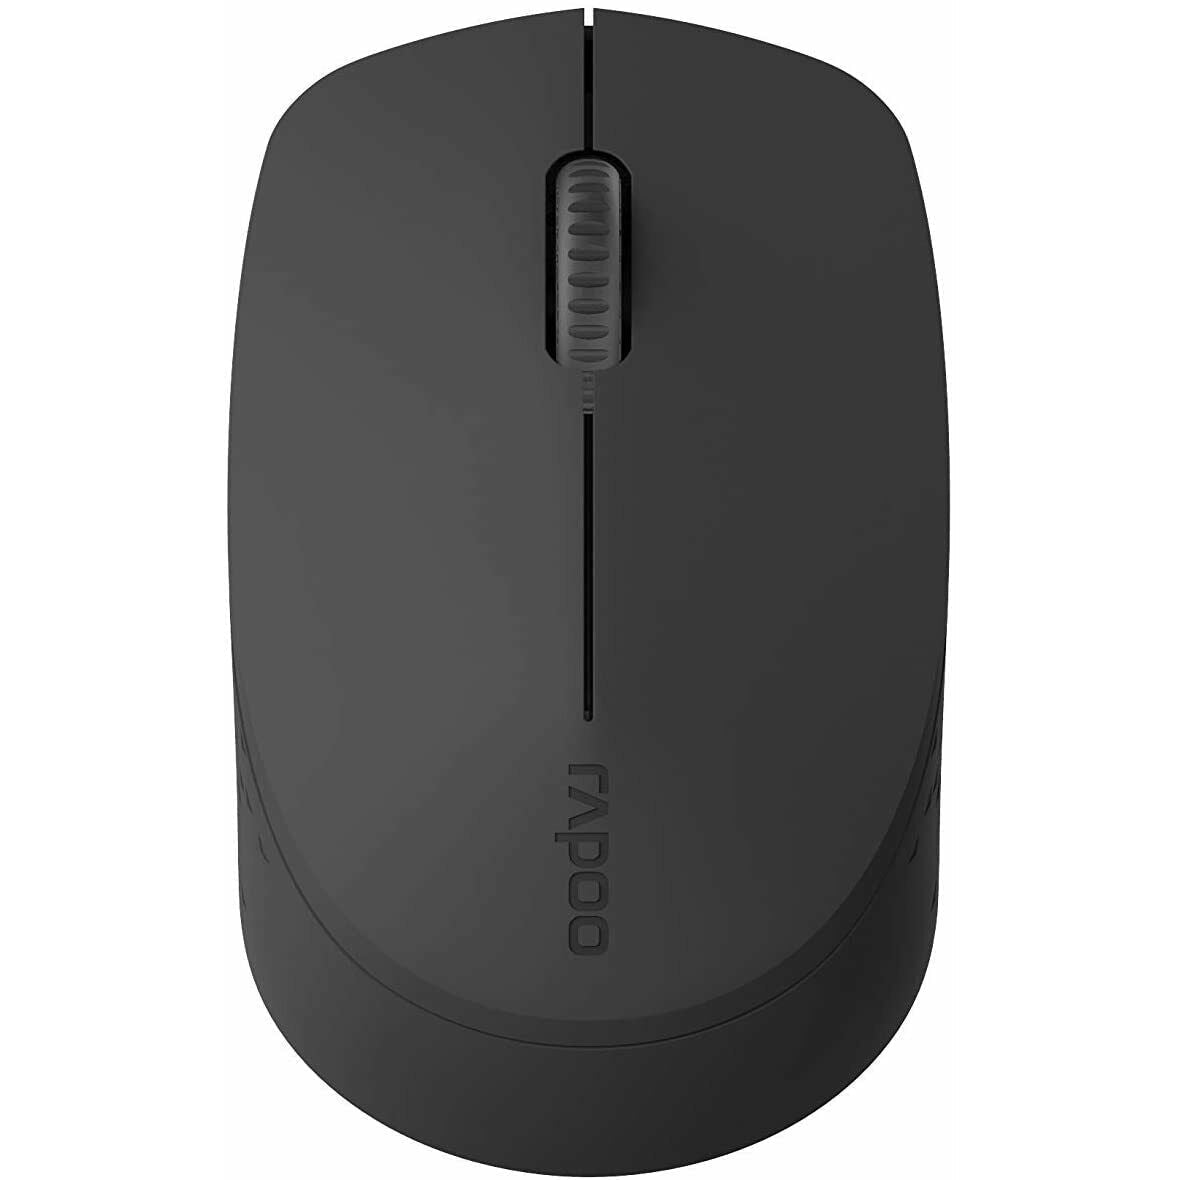 Rapoo M100 Multi-mode Wireless Silent Optical Mouse - Black - Refurbished Excellent